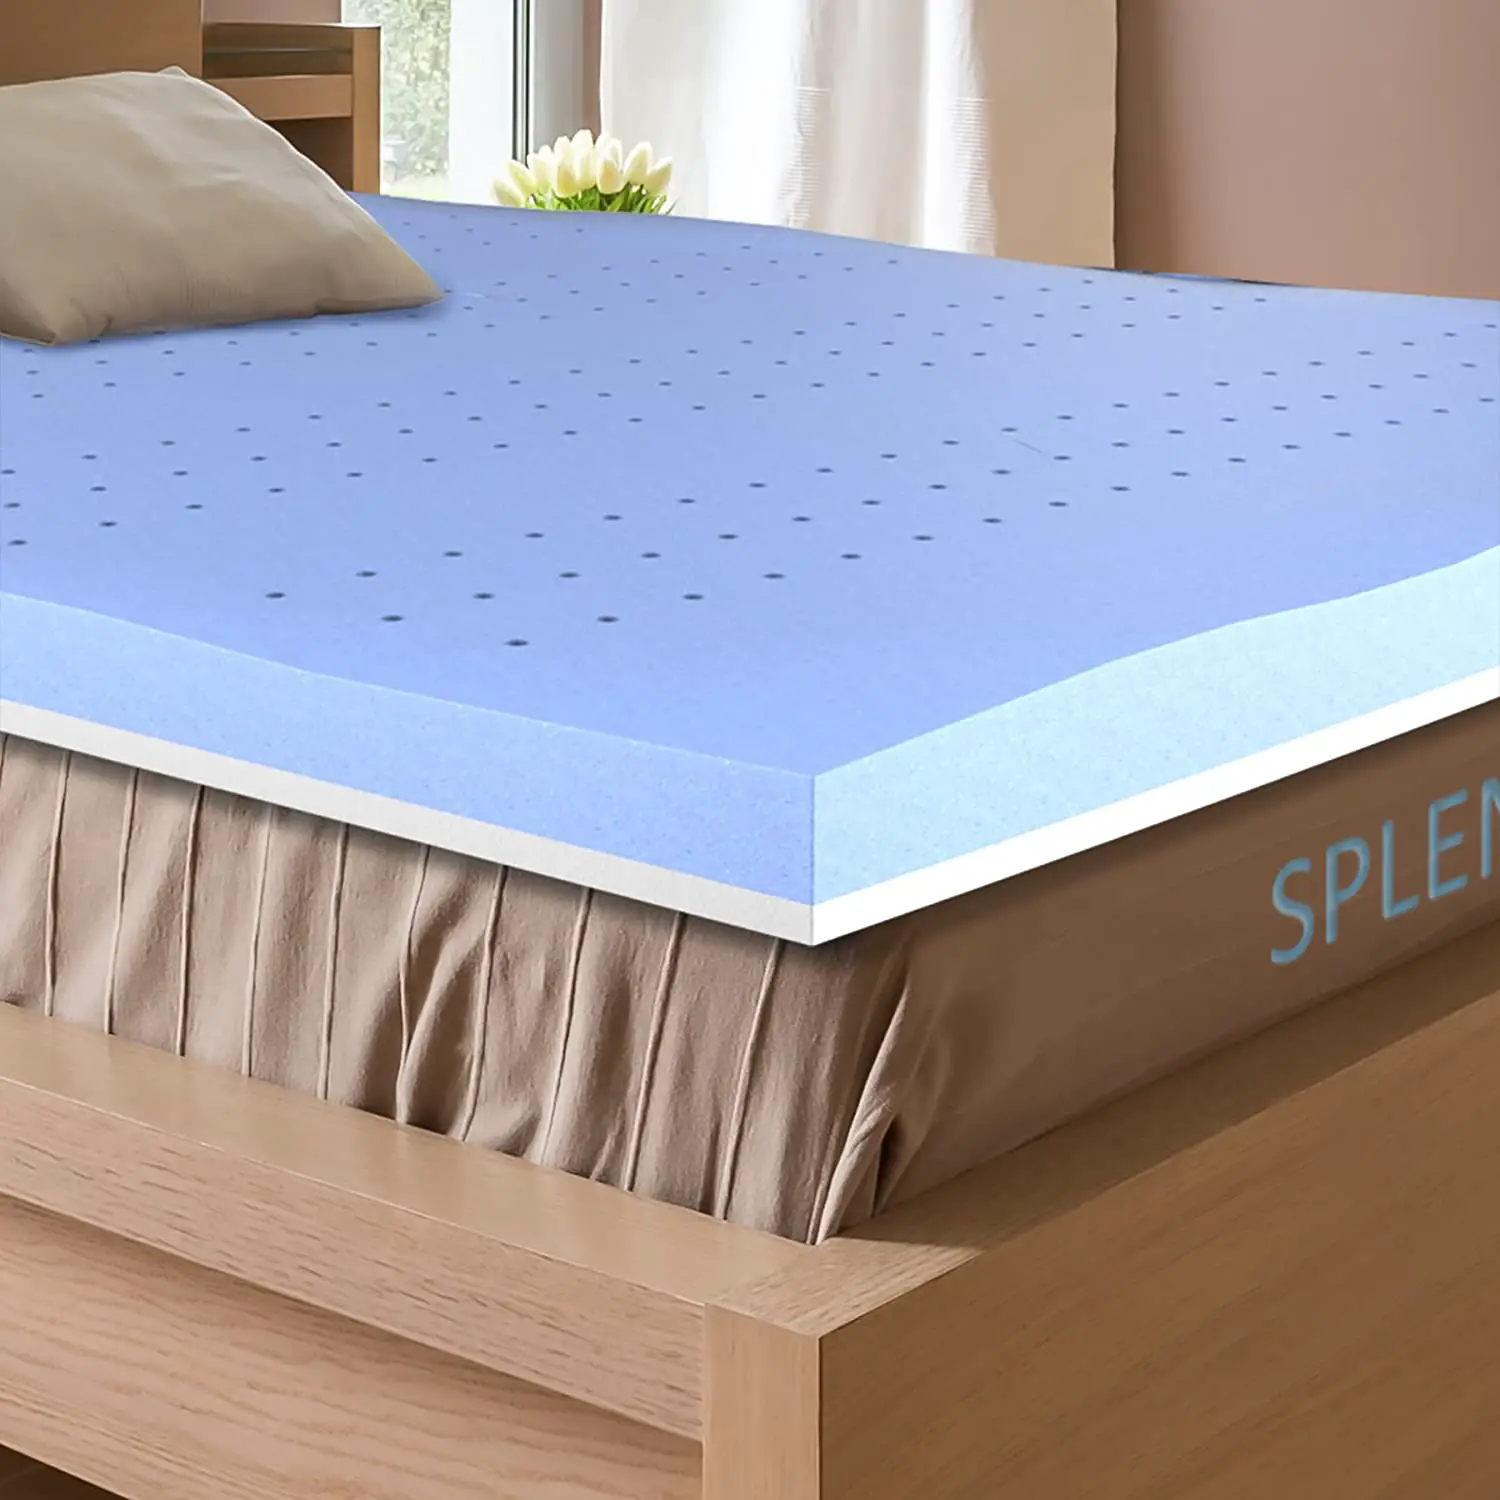 Costco Memory Foam Mattress Toppers  Firm And Supportive Toppers For A ...